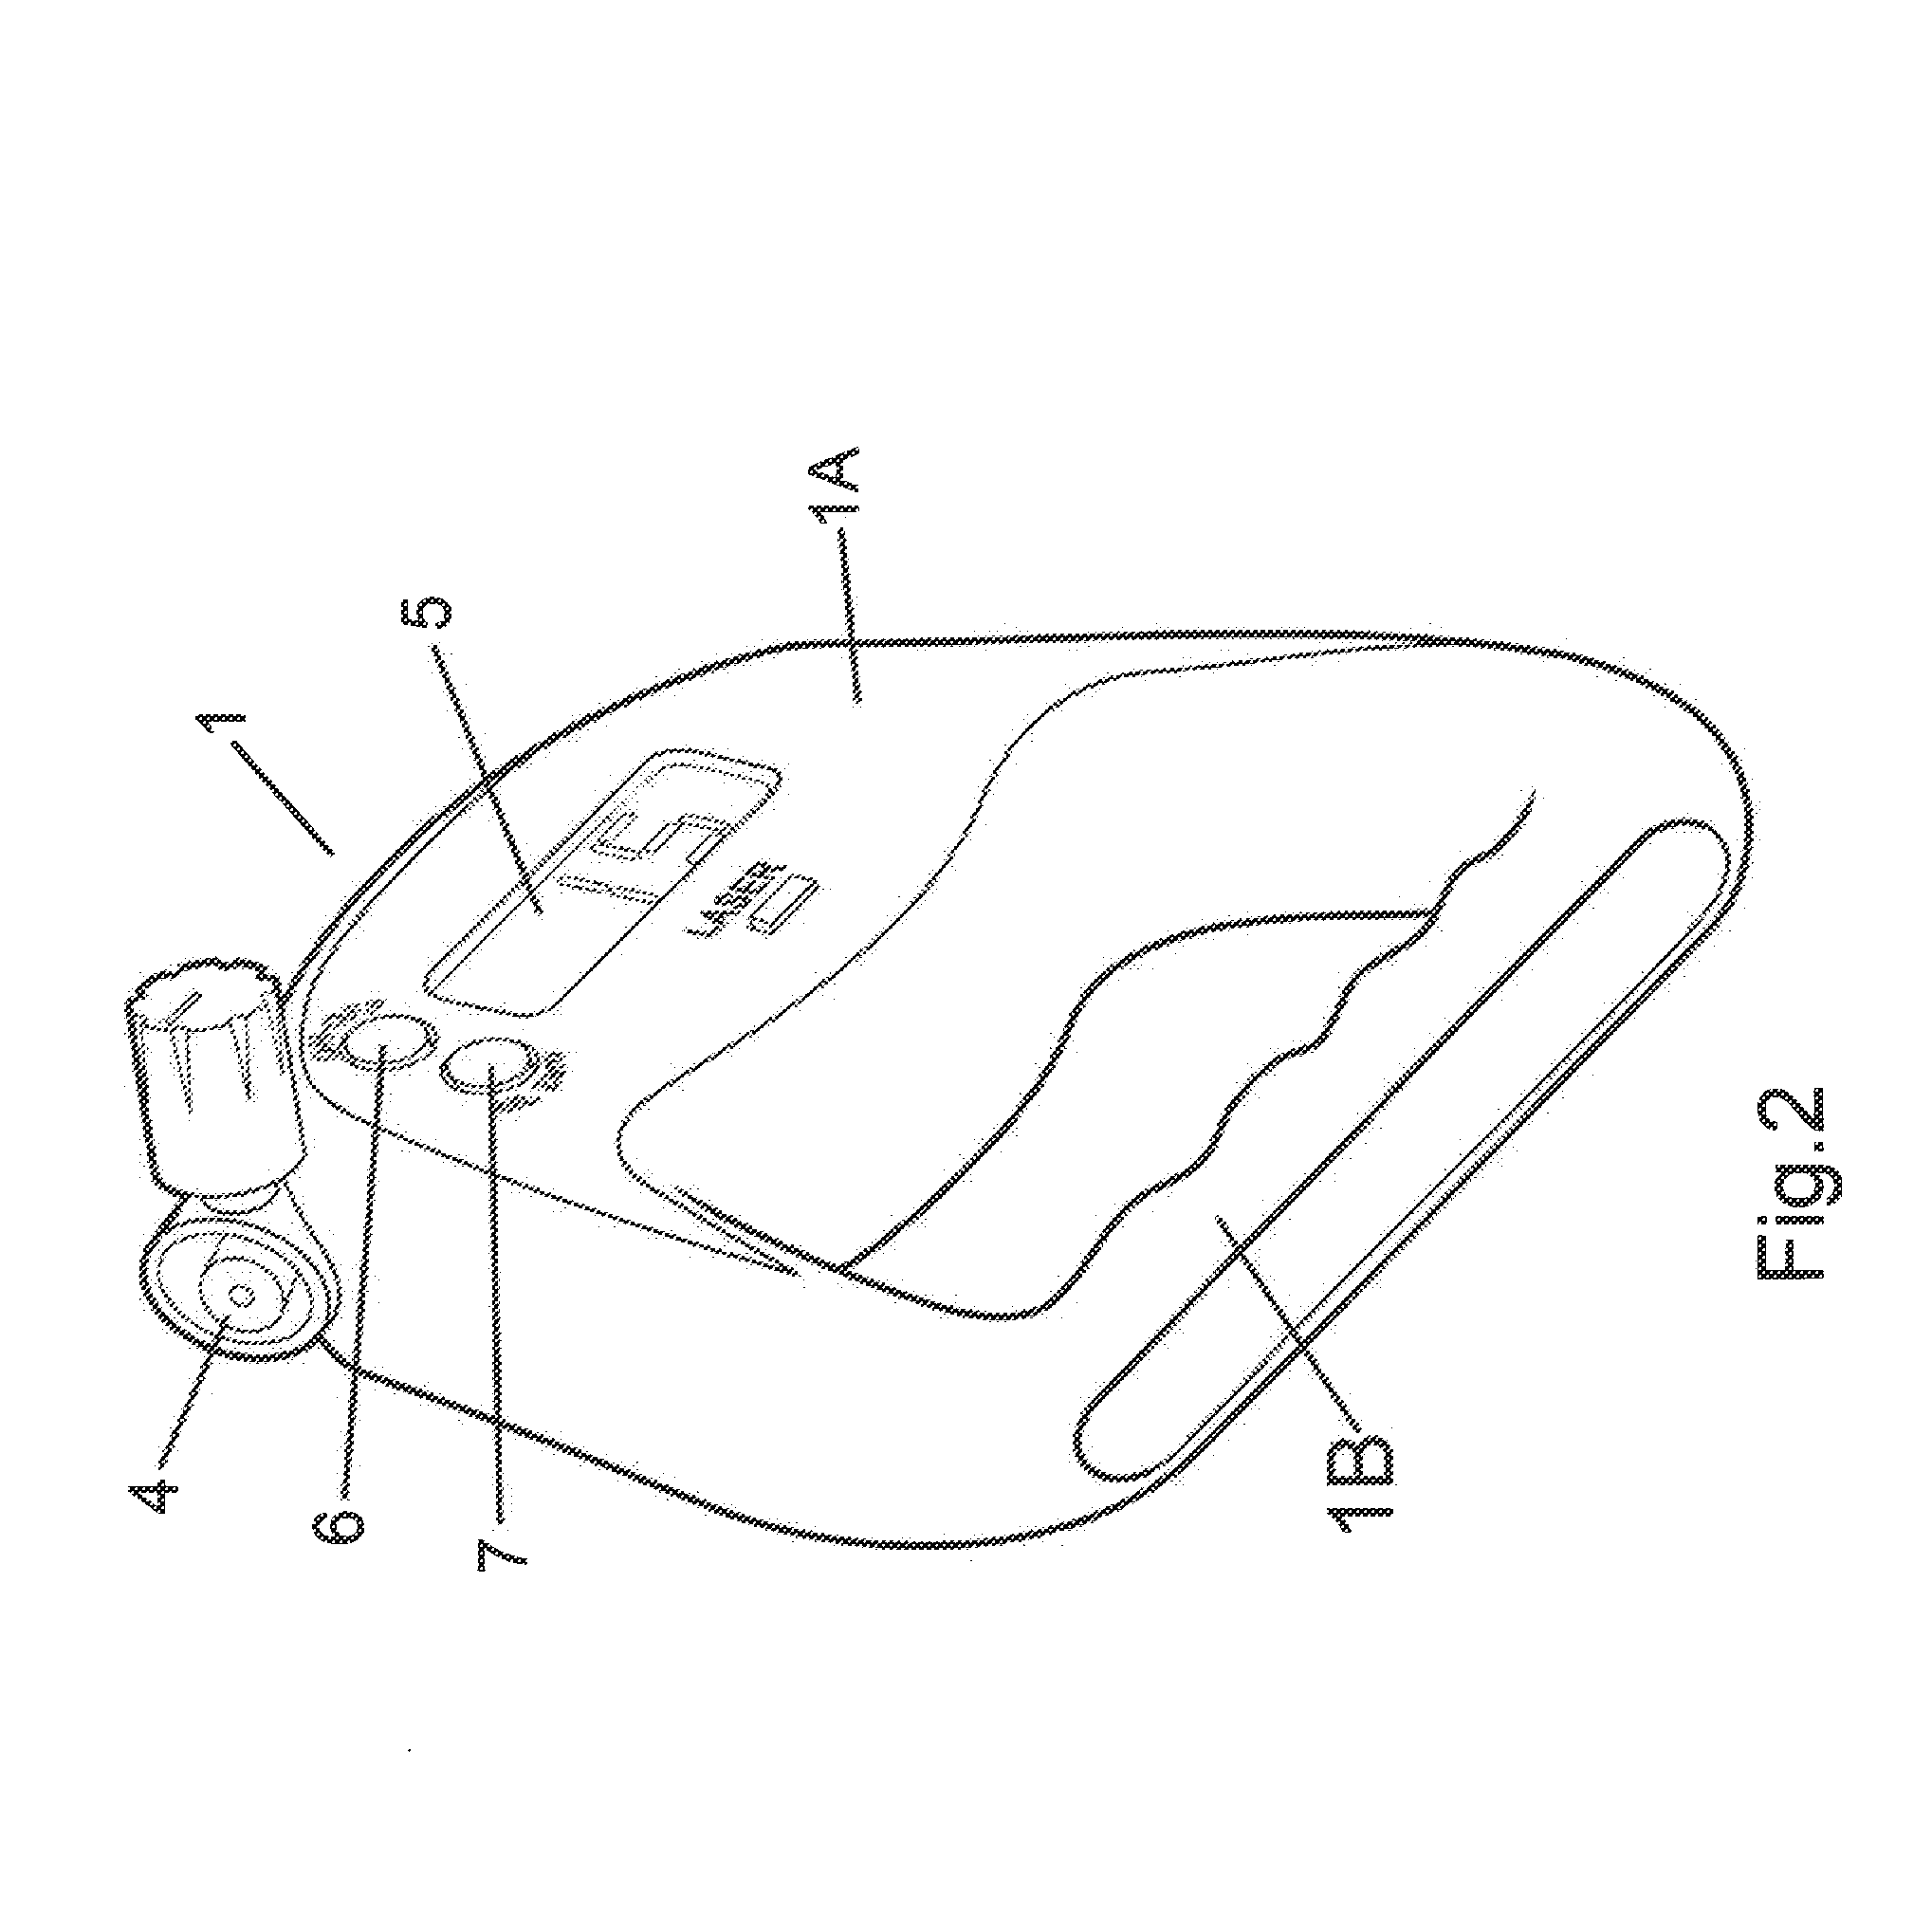 Portable surgical guide with laser, abduction and anteversion measuring system and method of using same